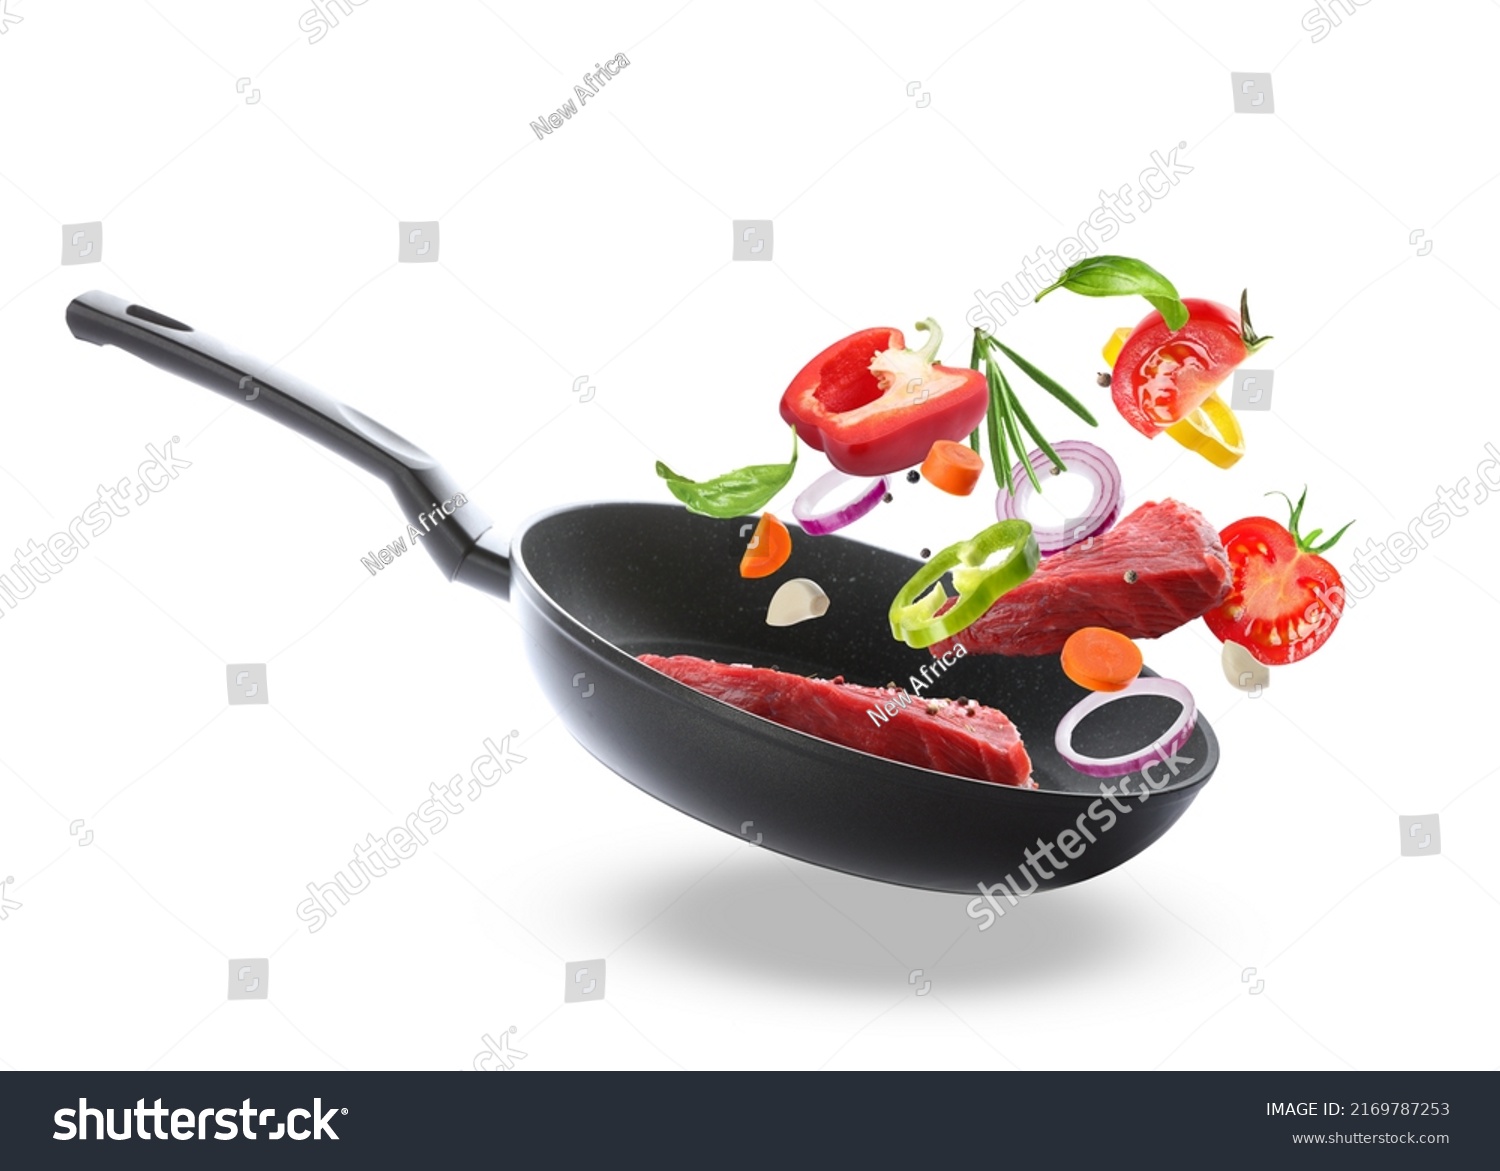 Tasty fresh ingredients and frying pan on white background #2169787253